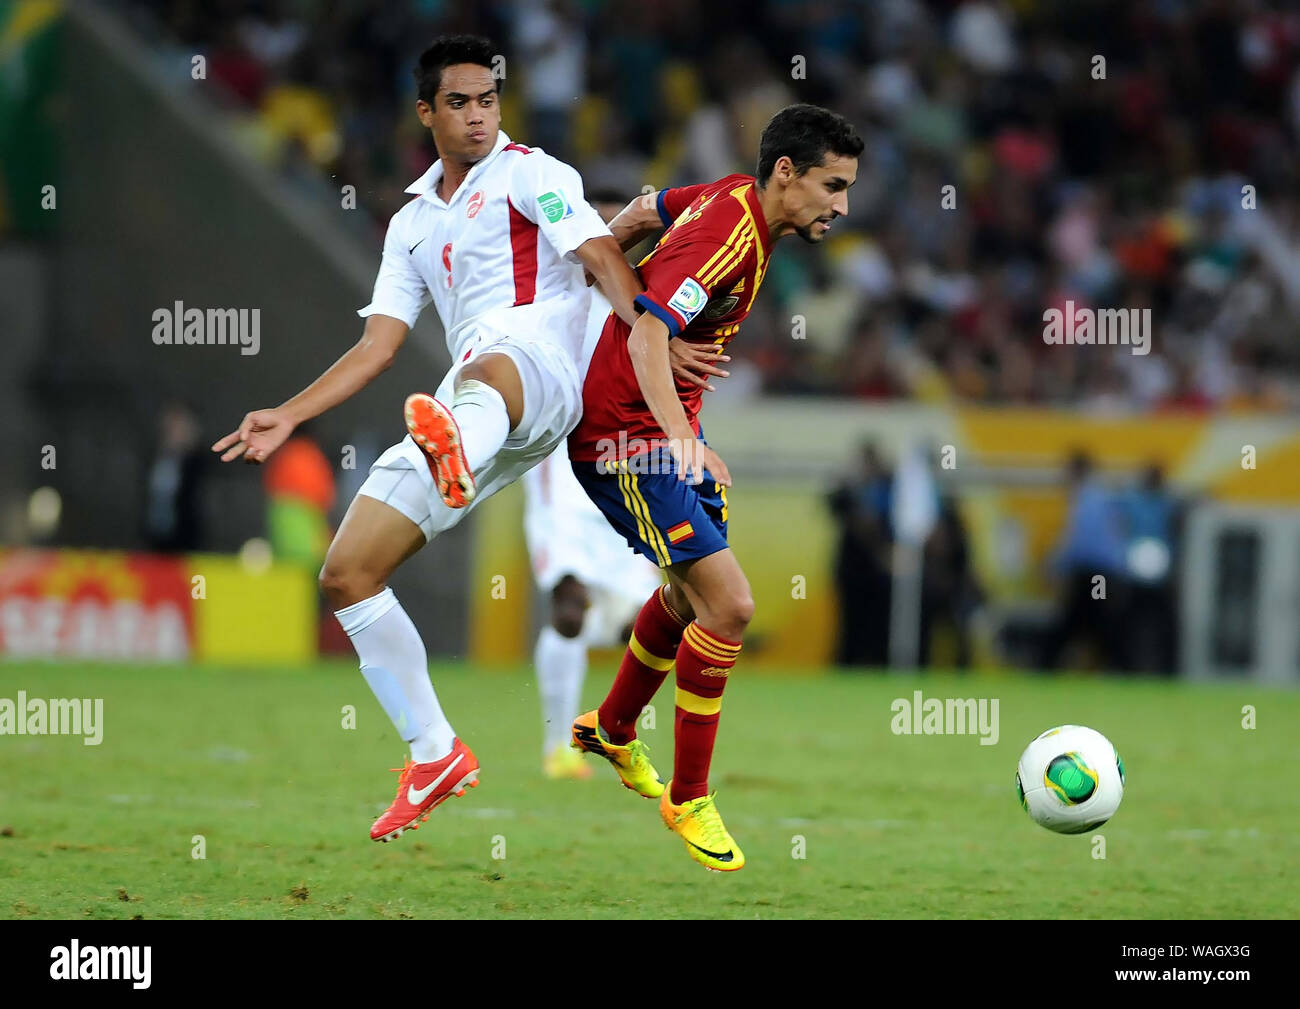 Rio de Janeiro, Brazil, June 20, 2013. Soccer players compete for the ball during the match Spain vs Tahiti for the 2013 Confederations Cup at the Mar Stock Photo